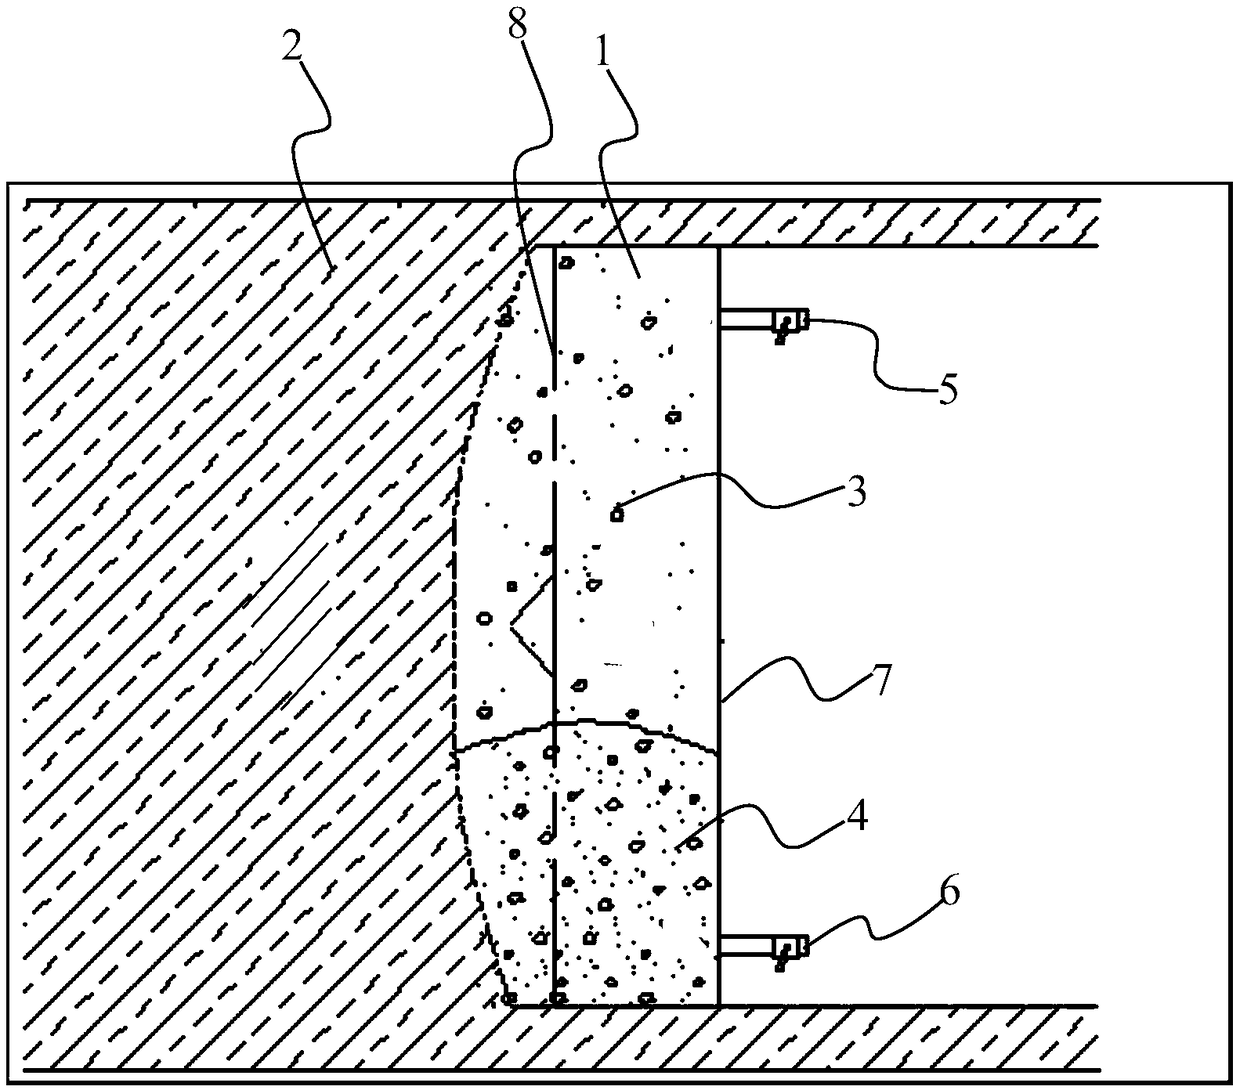 Soil chamber medium replacement method for shield tunneling machine in freezing process